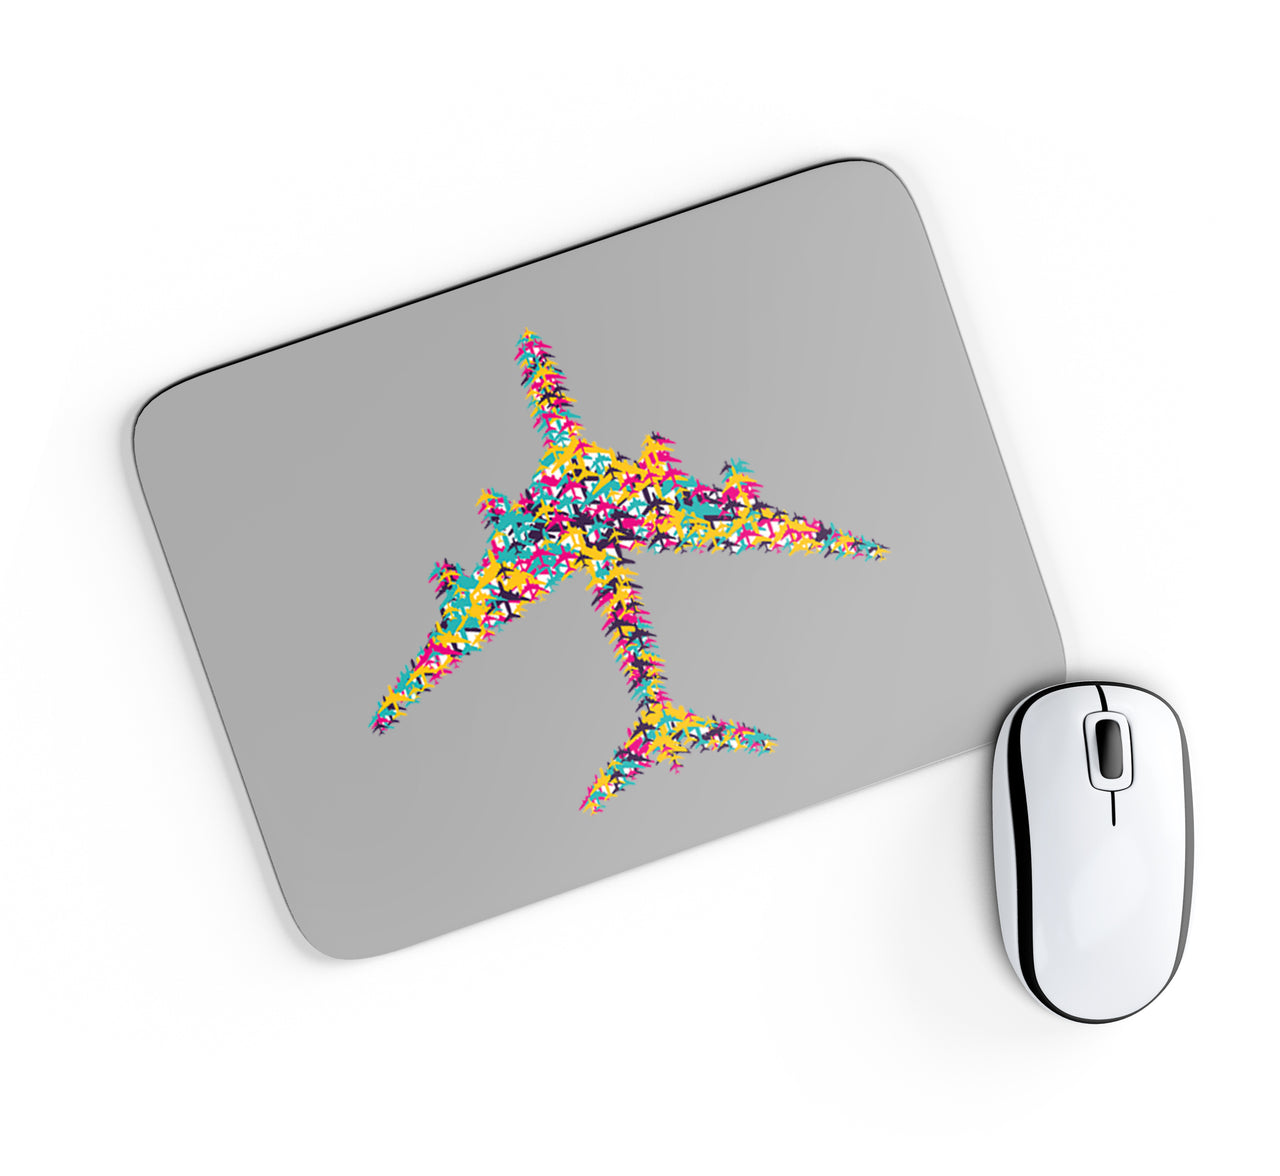 Colourful Airplane Designed Mouse Pads